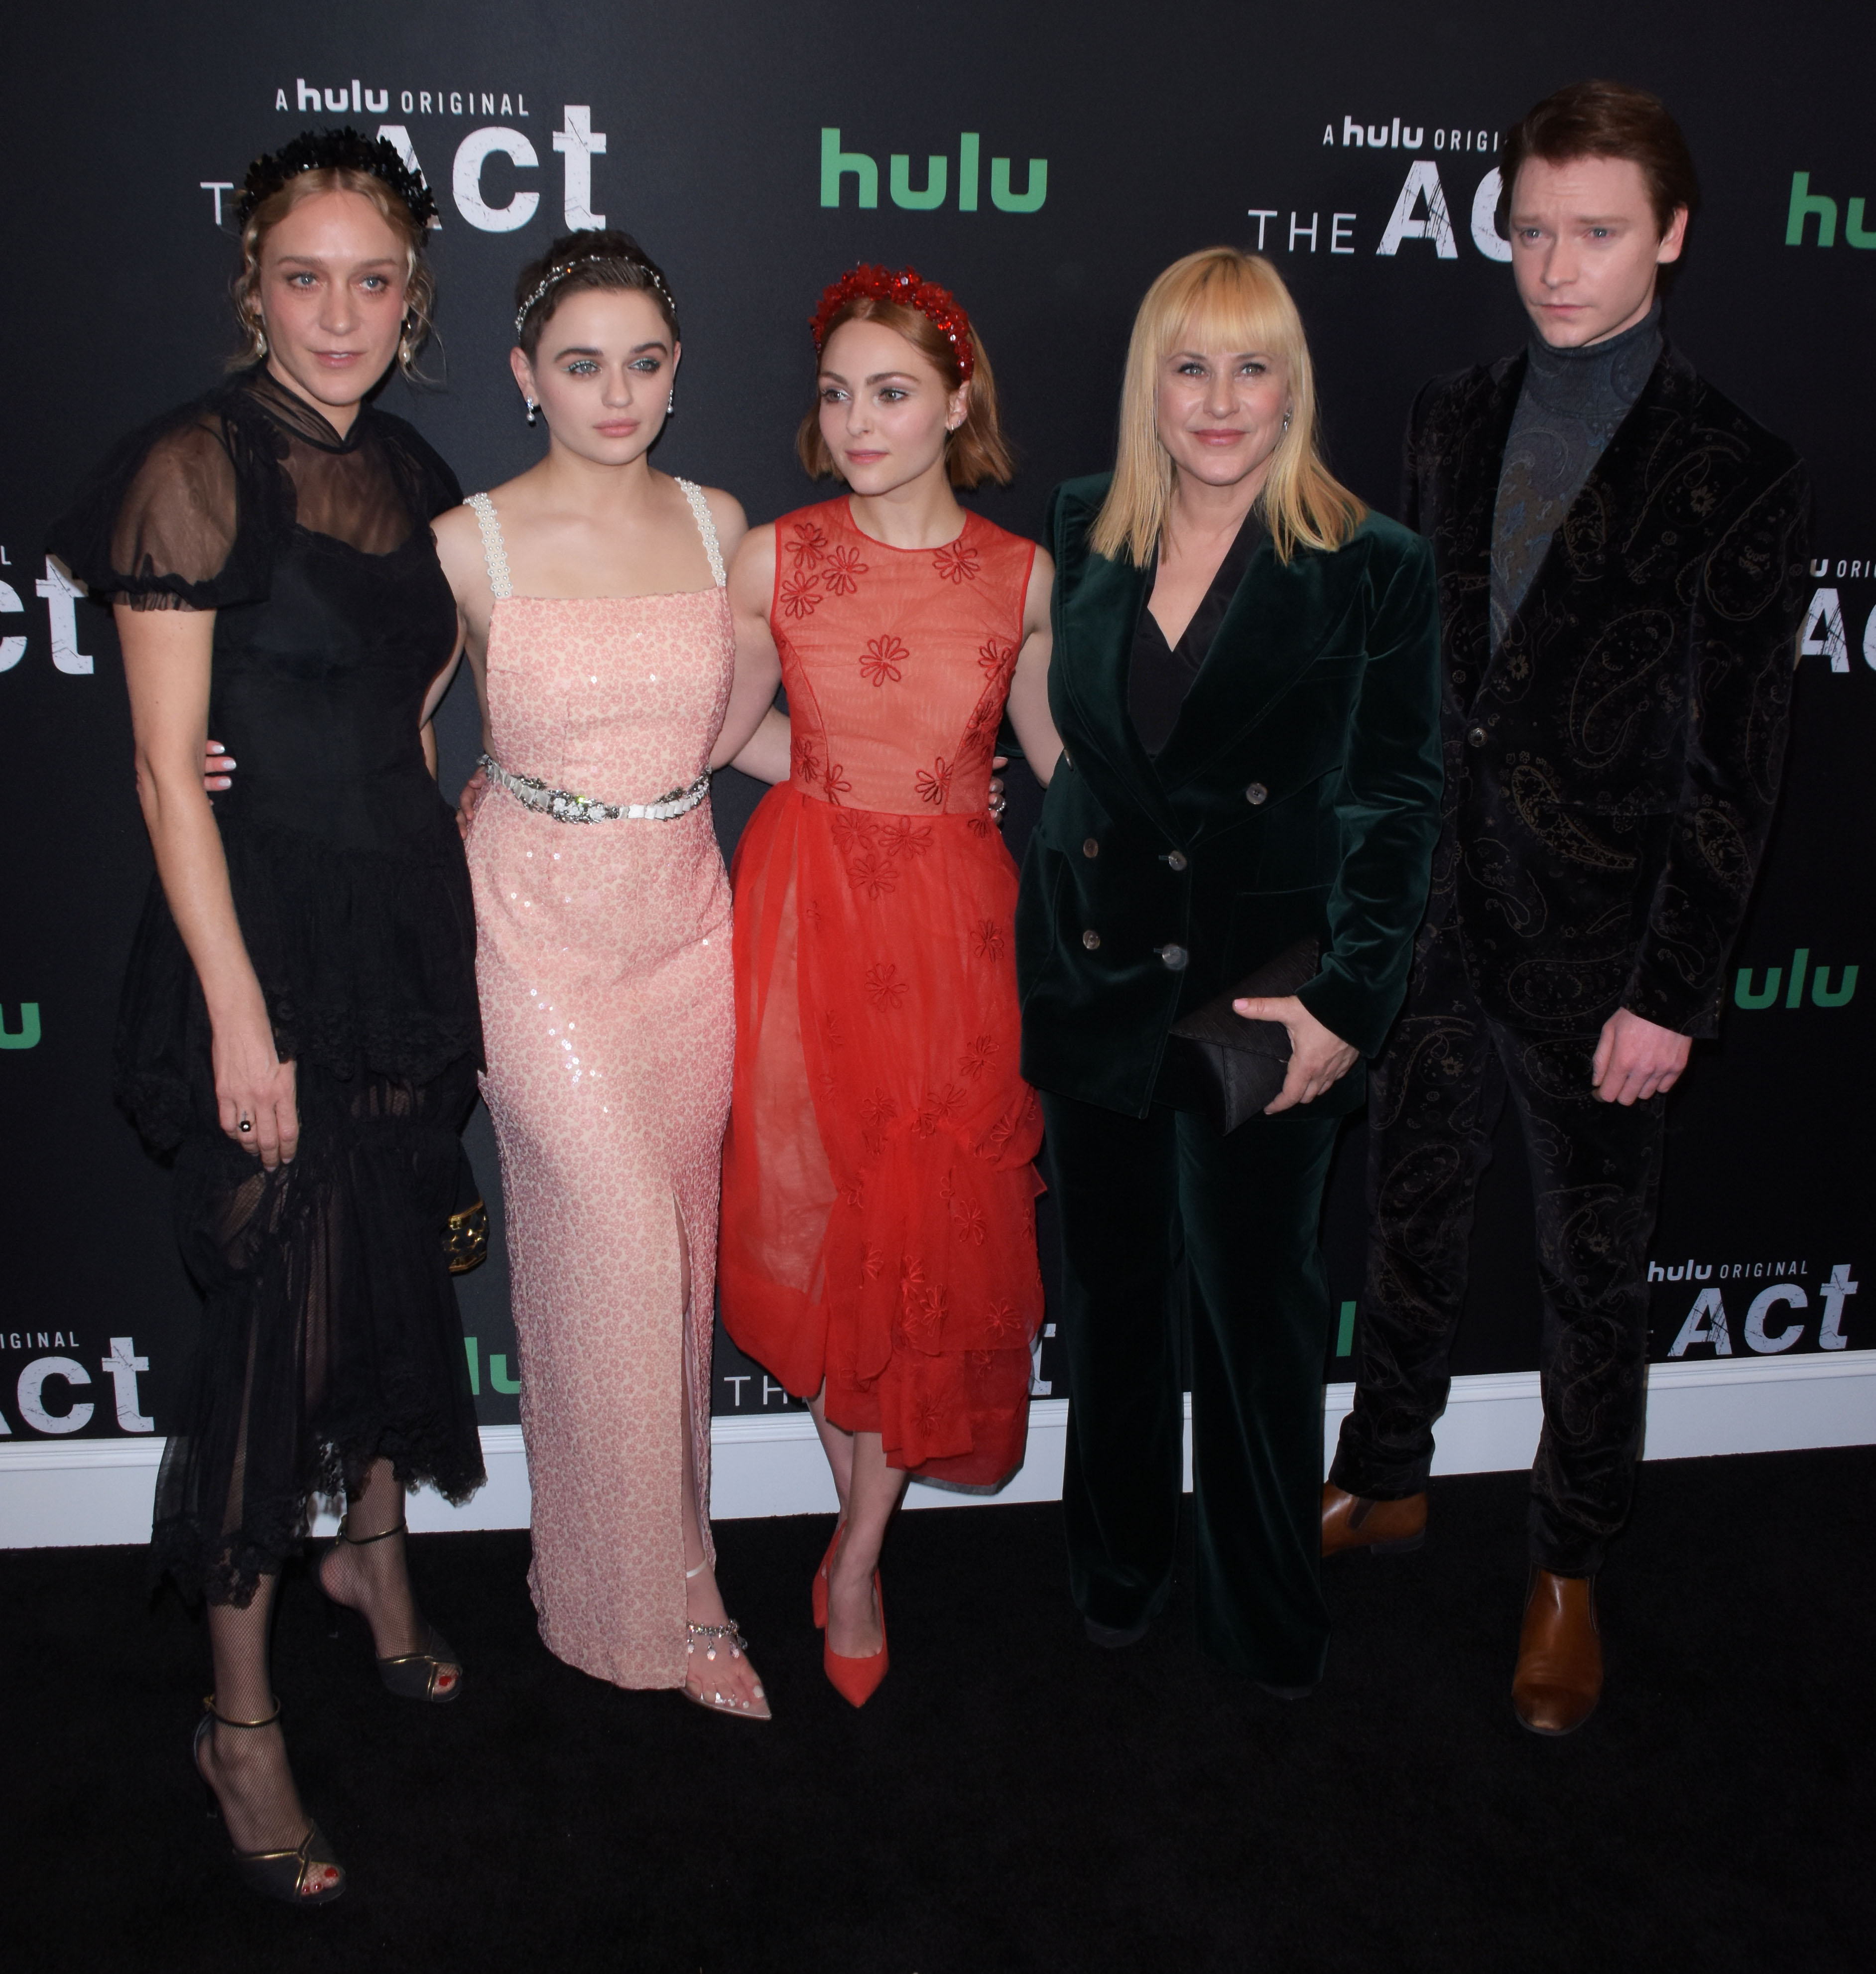 'The Act' Hulu Series NYC Premiere